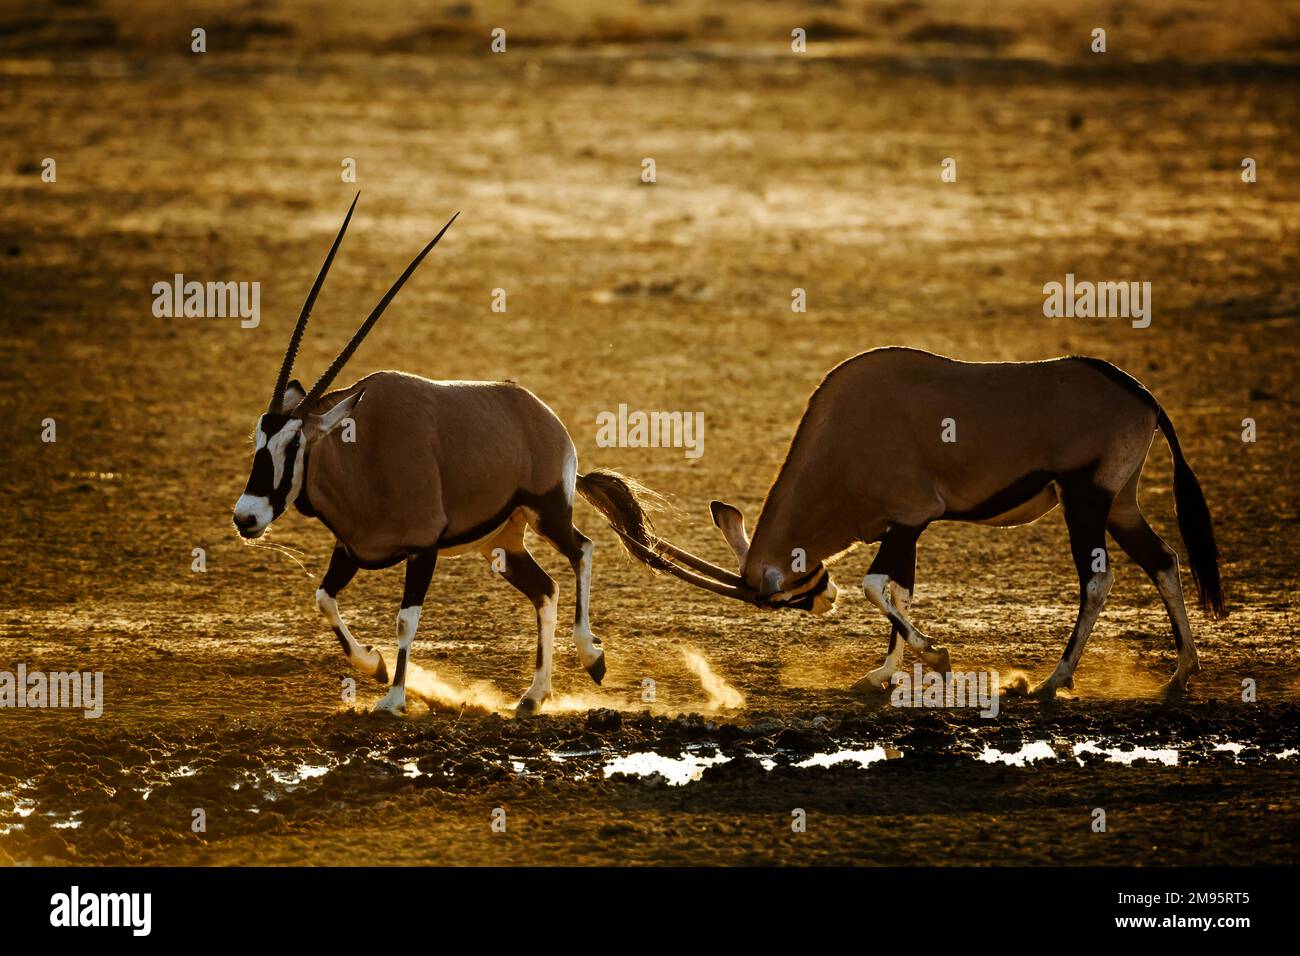 Two South African Oryx dueling in sand at dusk in Kgalagadi transfrontier park, South Africa; specie Oryx gazella family of Bovidae Stock Photo